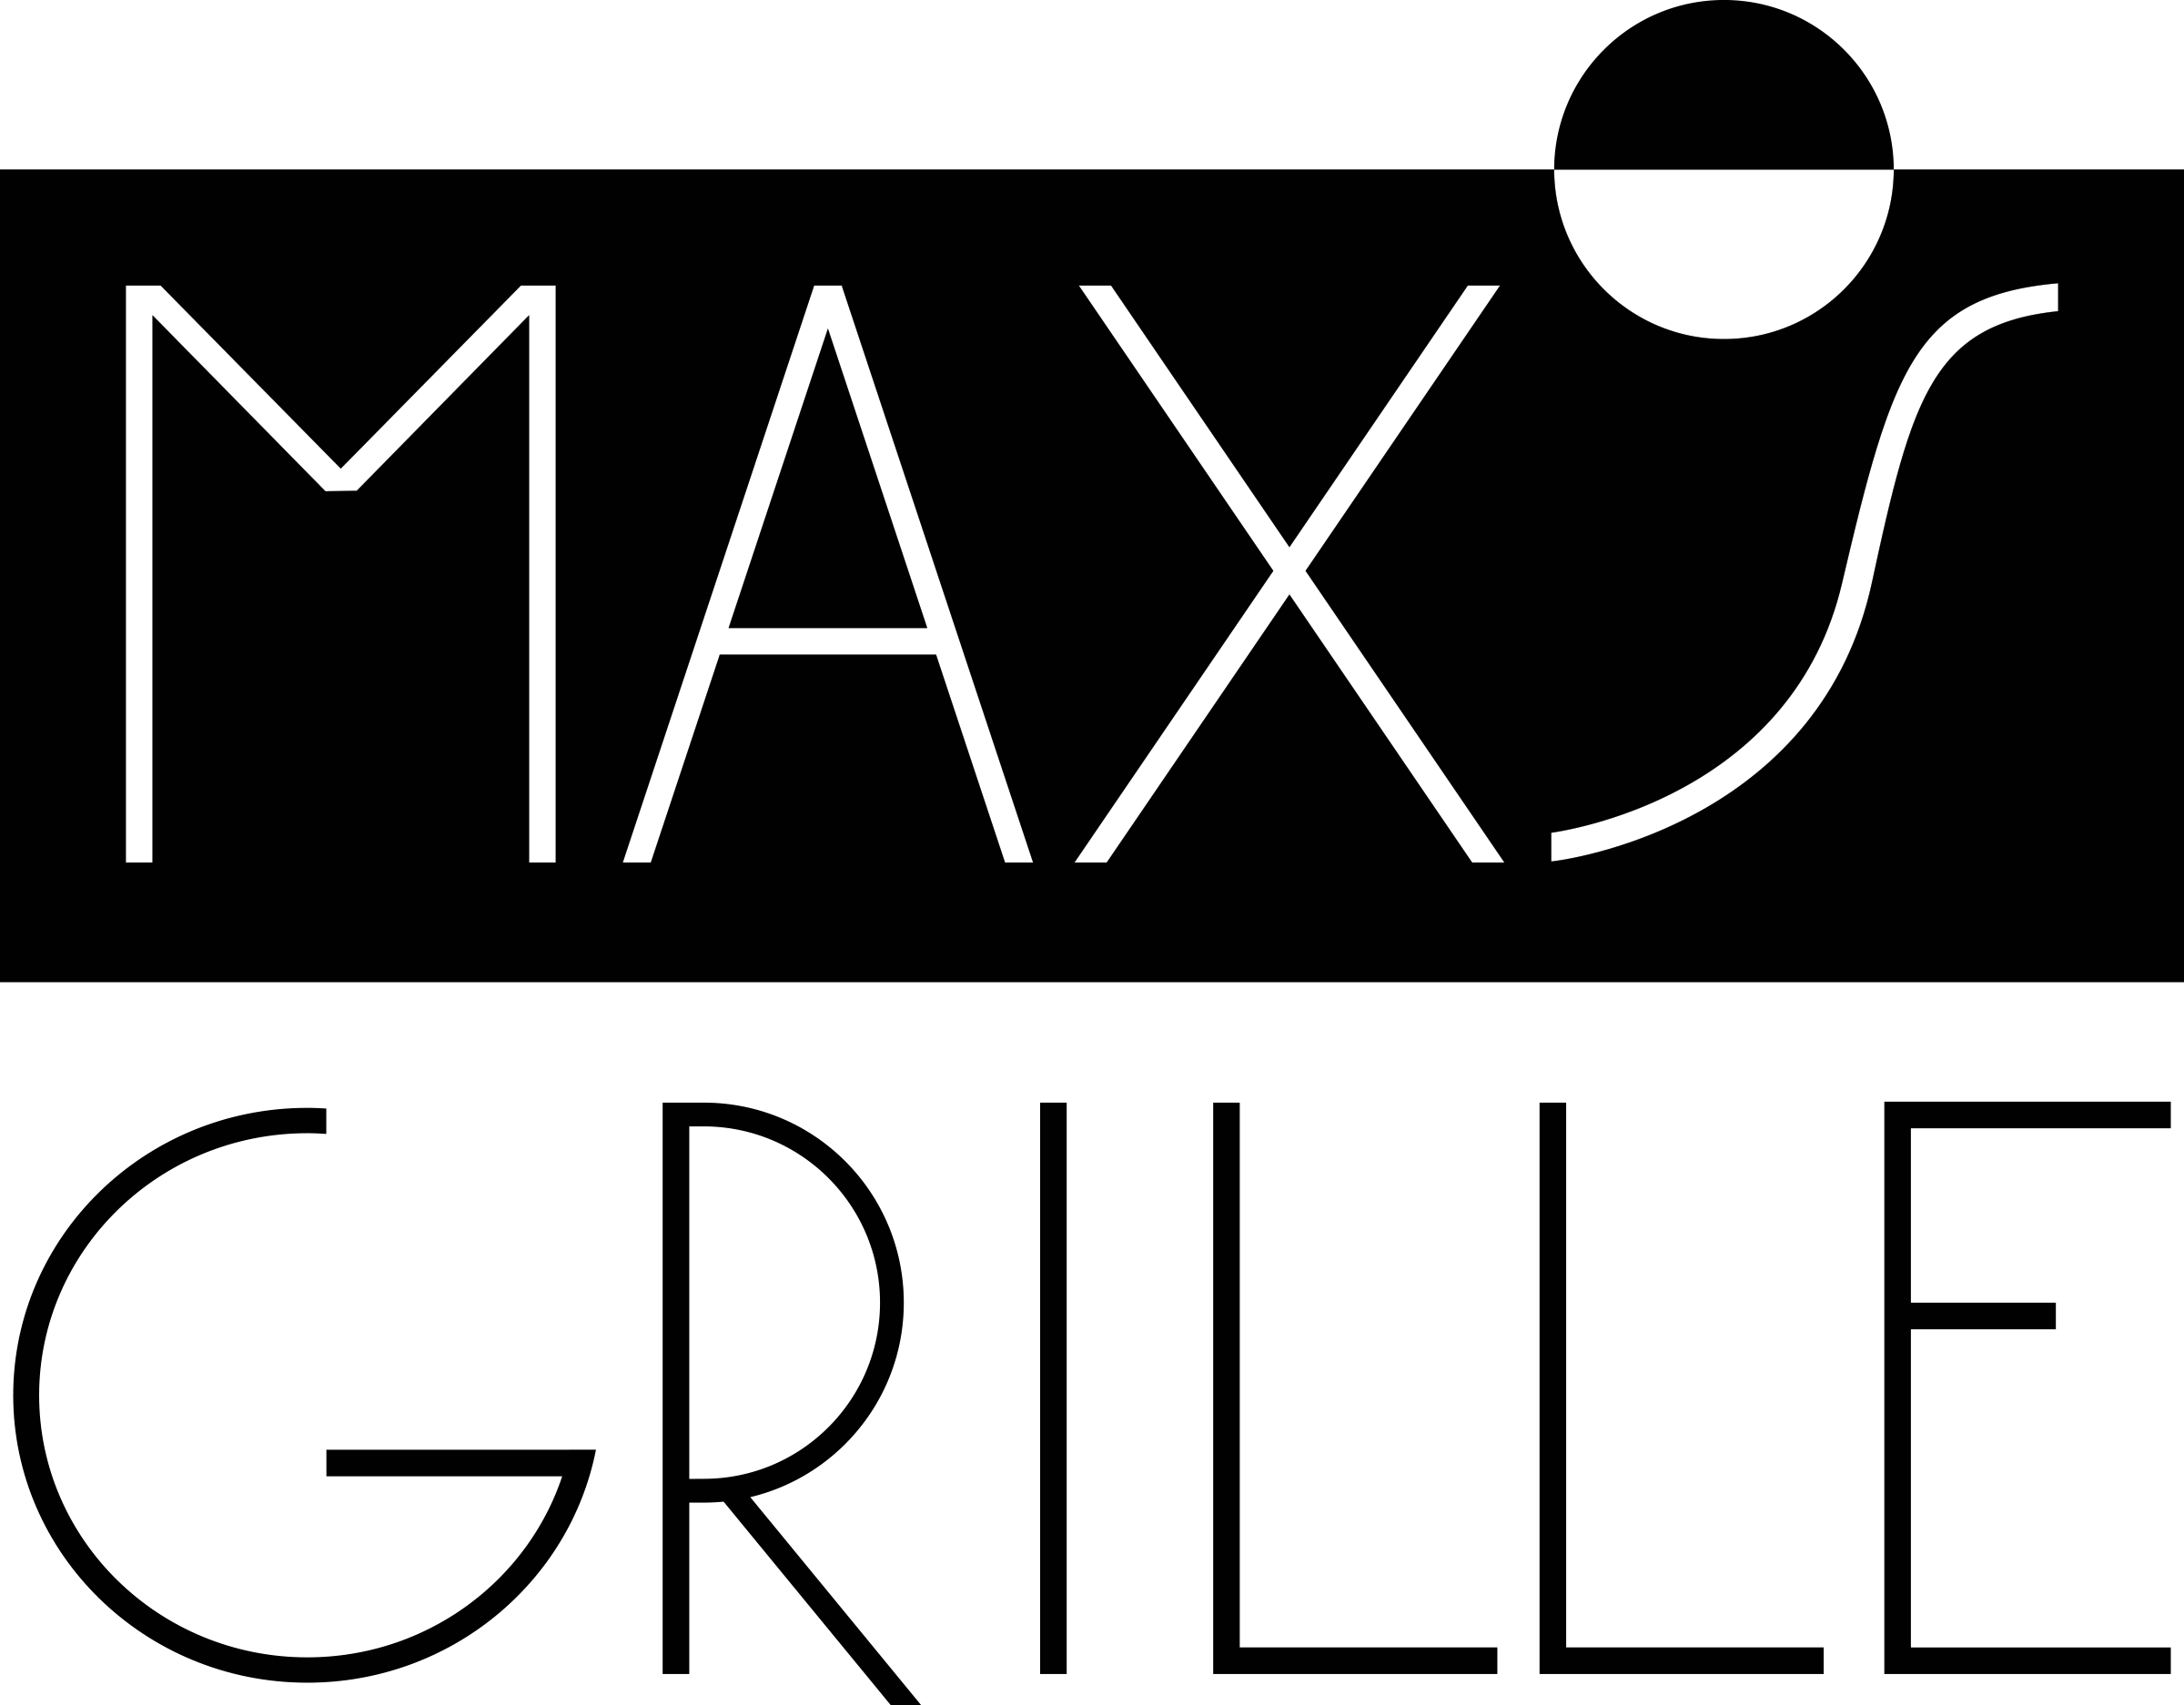 Max's Grille